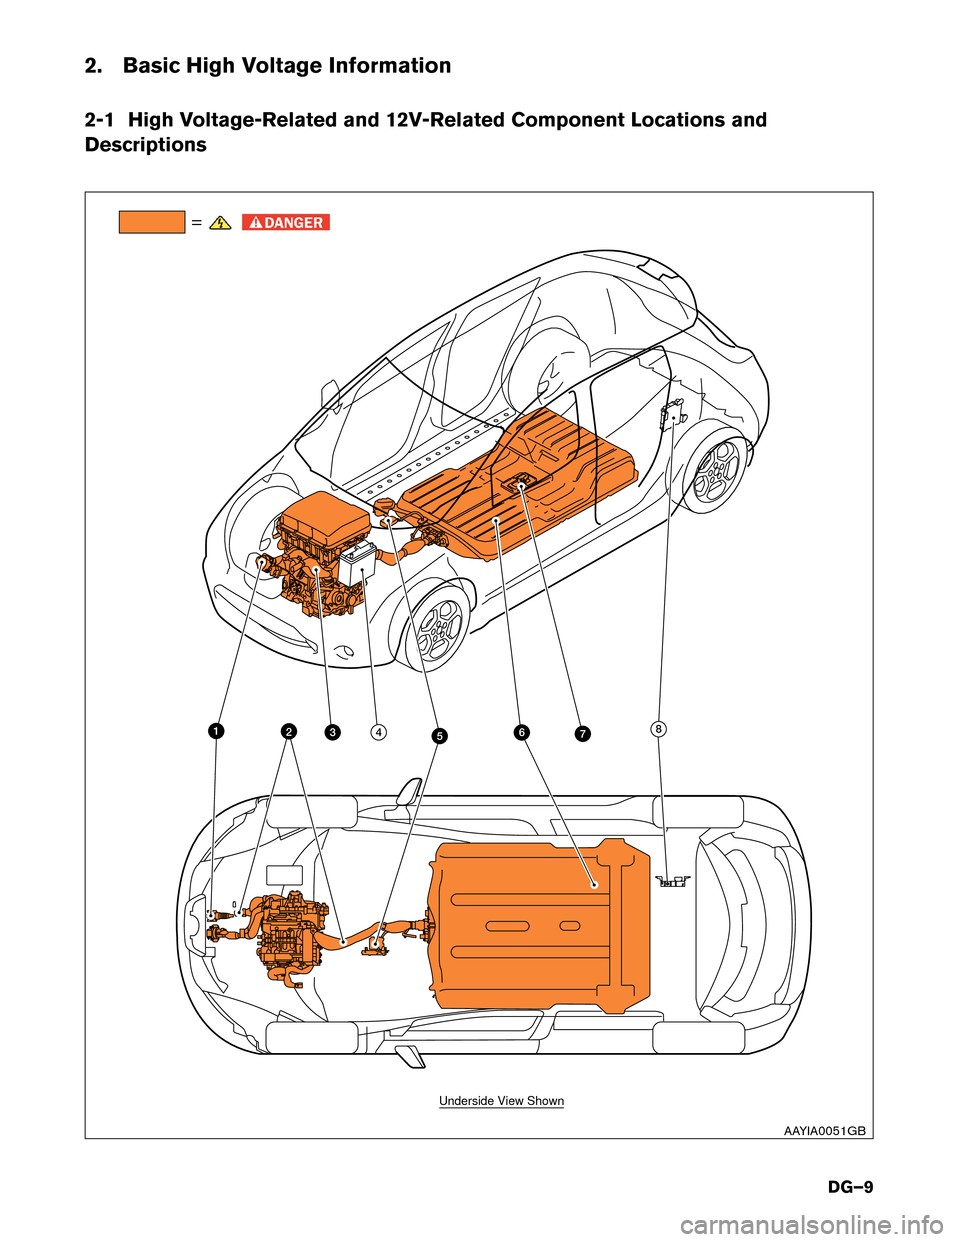 NISSAN LEAF 2015 1.G Dismantling Guide 2. Basic High Voltage Information
2-1
High Voltage-Related and 12V-Related Component Locations and
Descriptions =
76
342 8
5 1
Underside View Shown
AAYIA0051GB
DG–9  